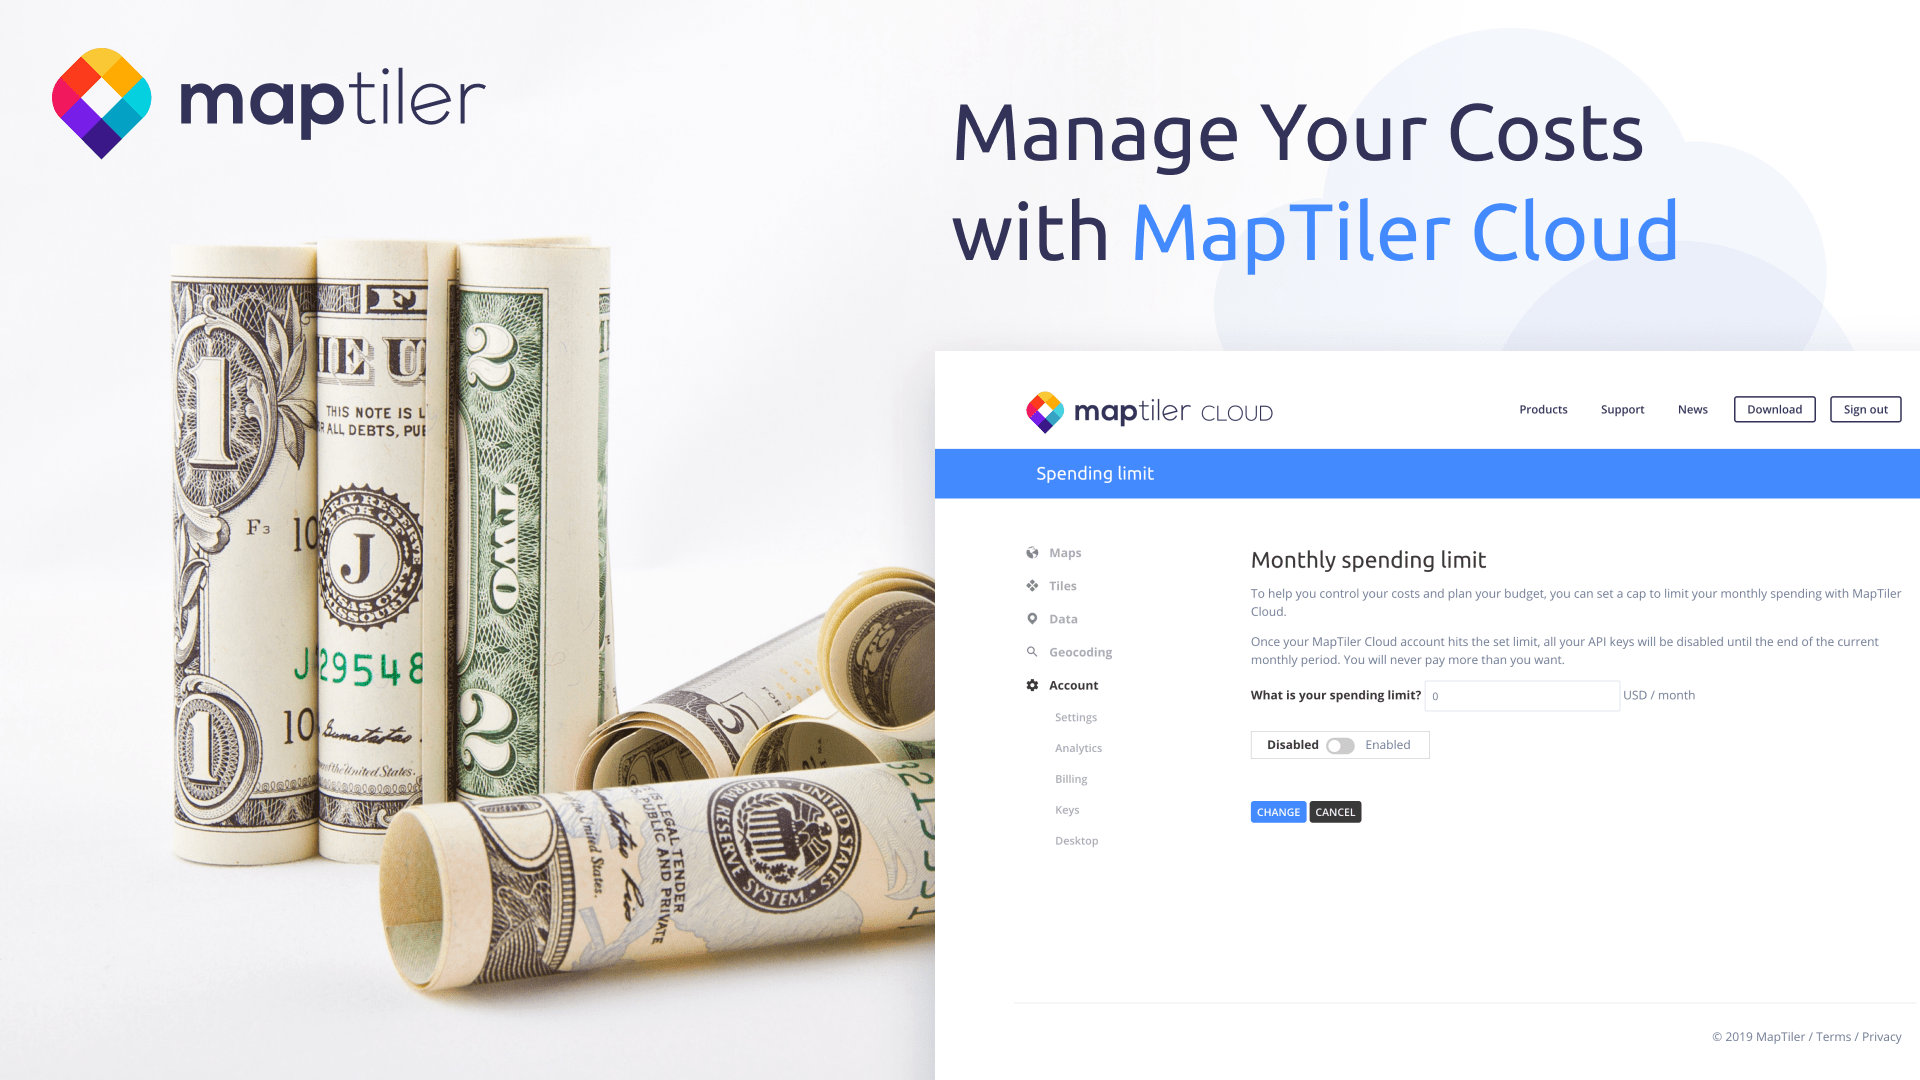 Manage Your Costs with MapTiler Cloud image